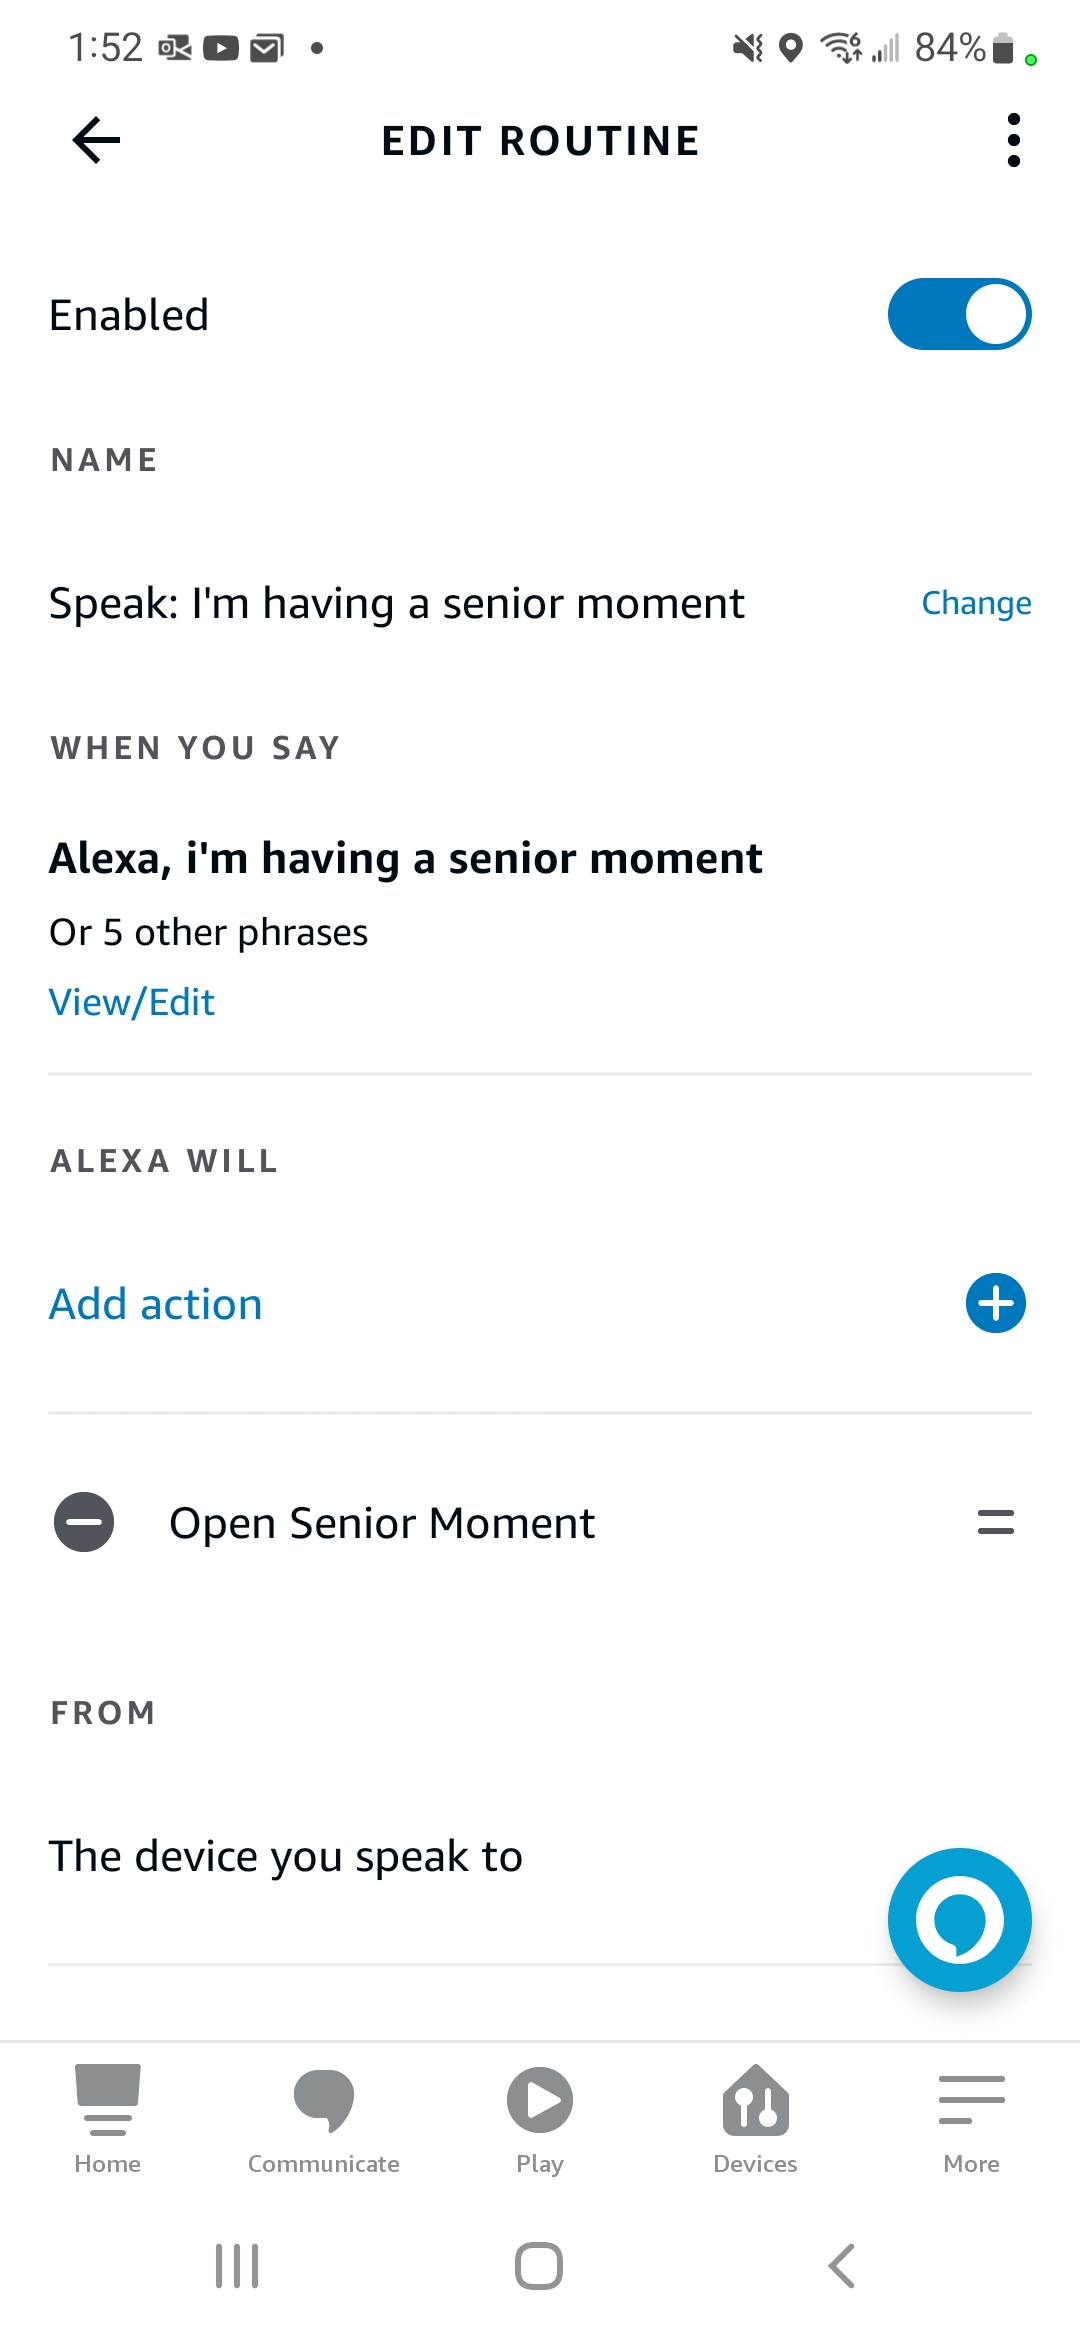 The Senior Moment Alexa Skill can remember this for your mother